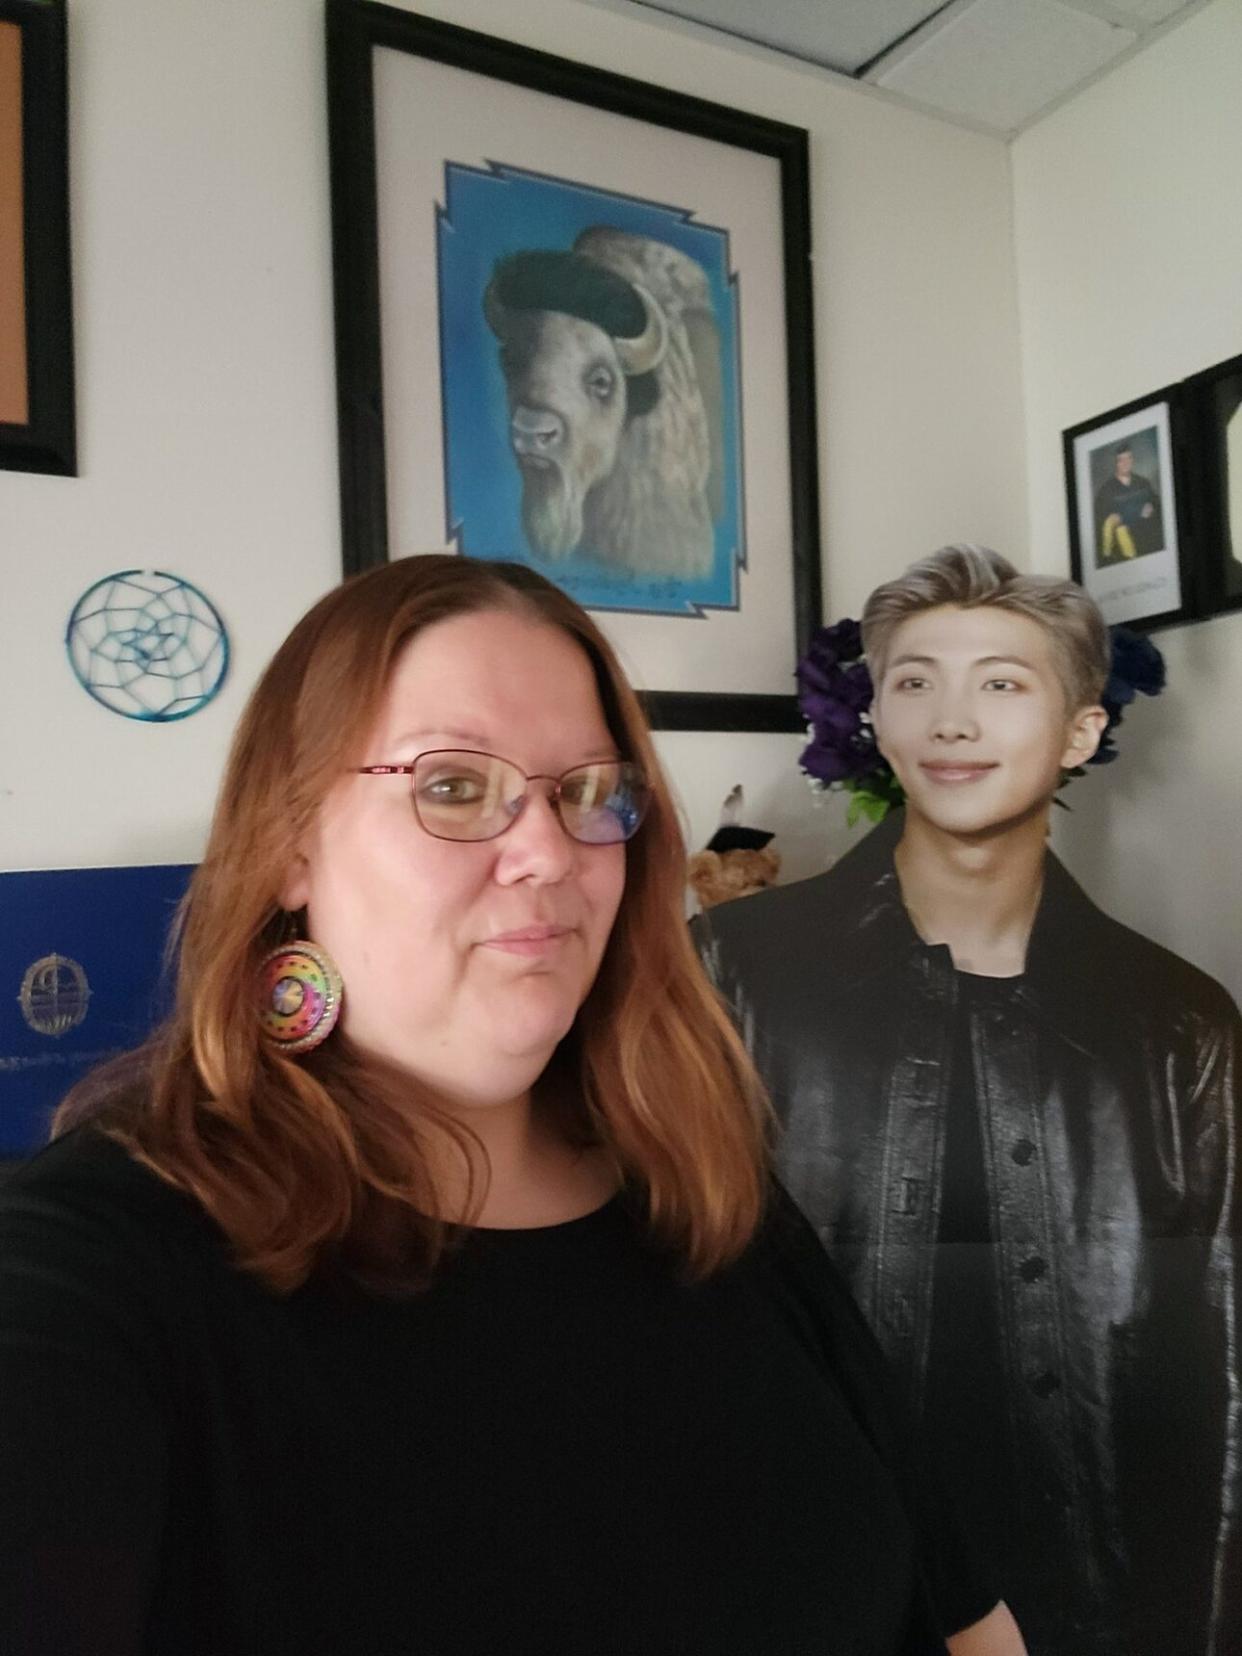 Joy Bridwell with her lifestyle cutout of BTS’s RM. (Credit: Courtesy of Joy Bridwell’s private collection.)